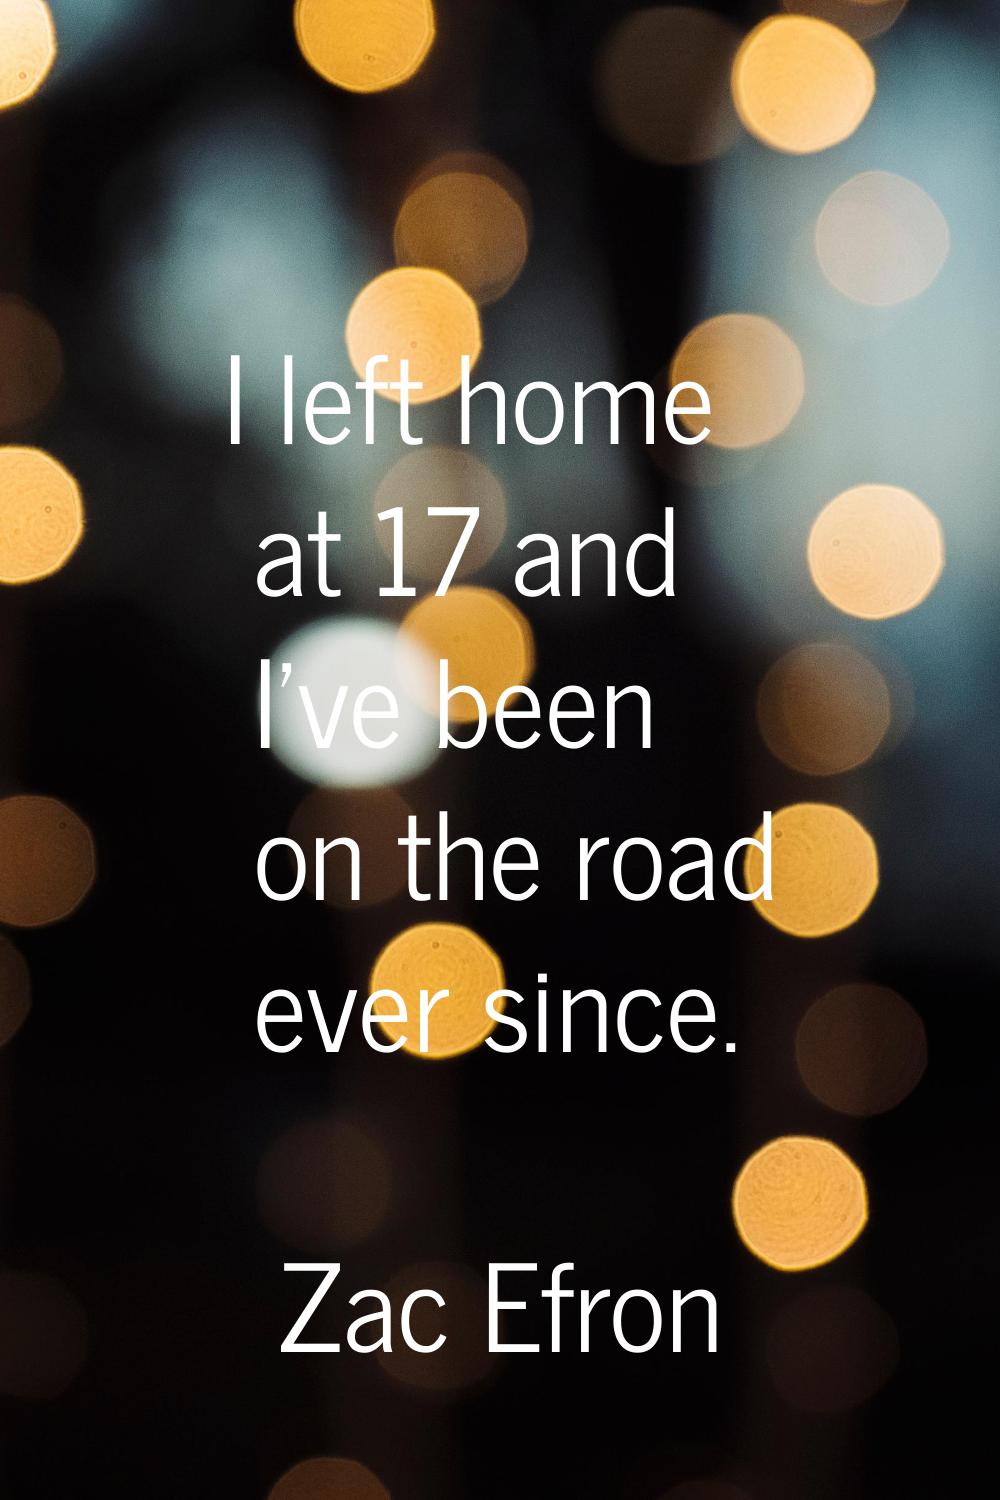 I left home at 17 and I've been on the road ever since.